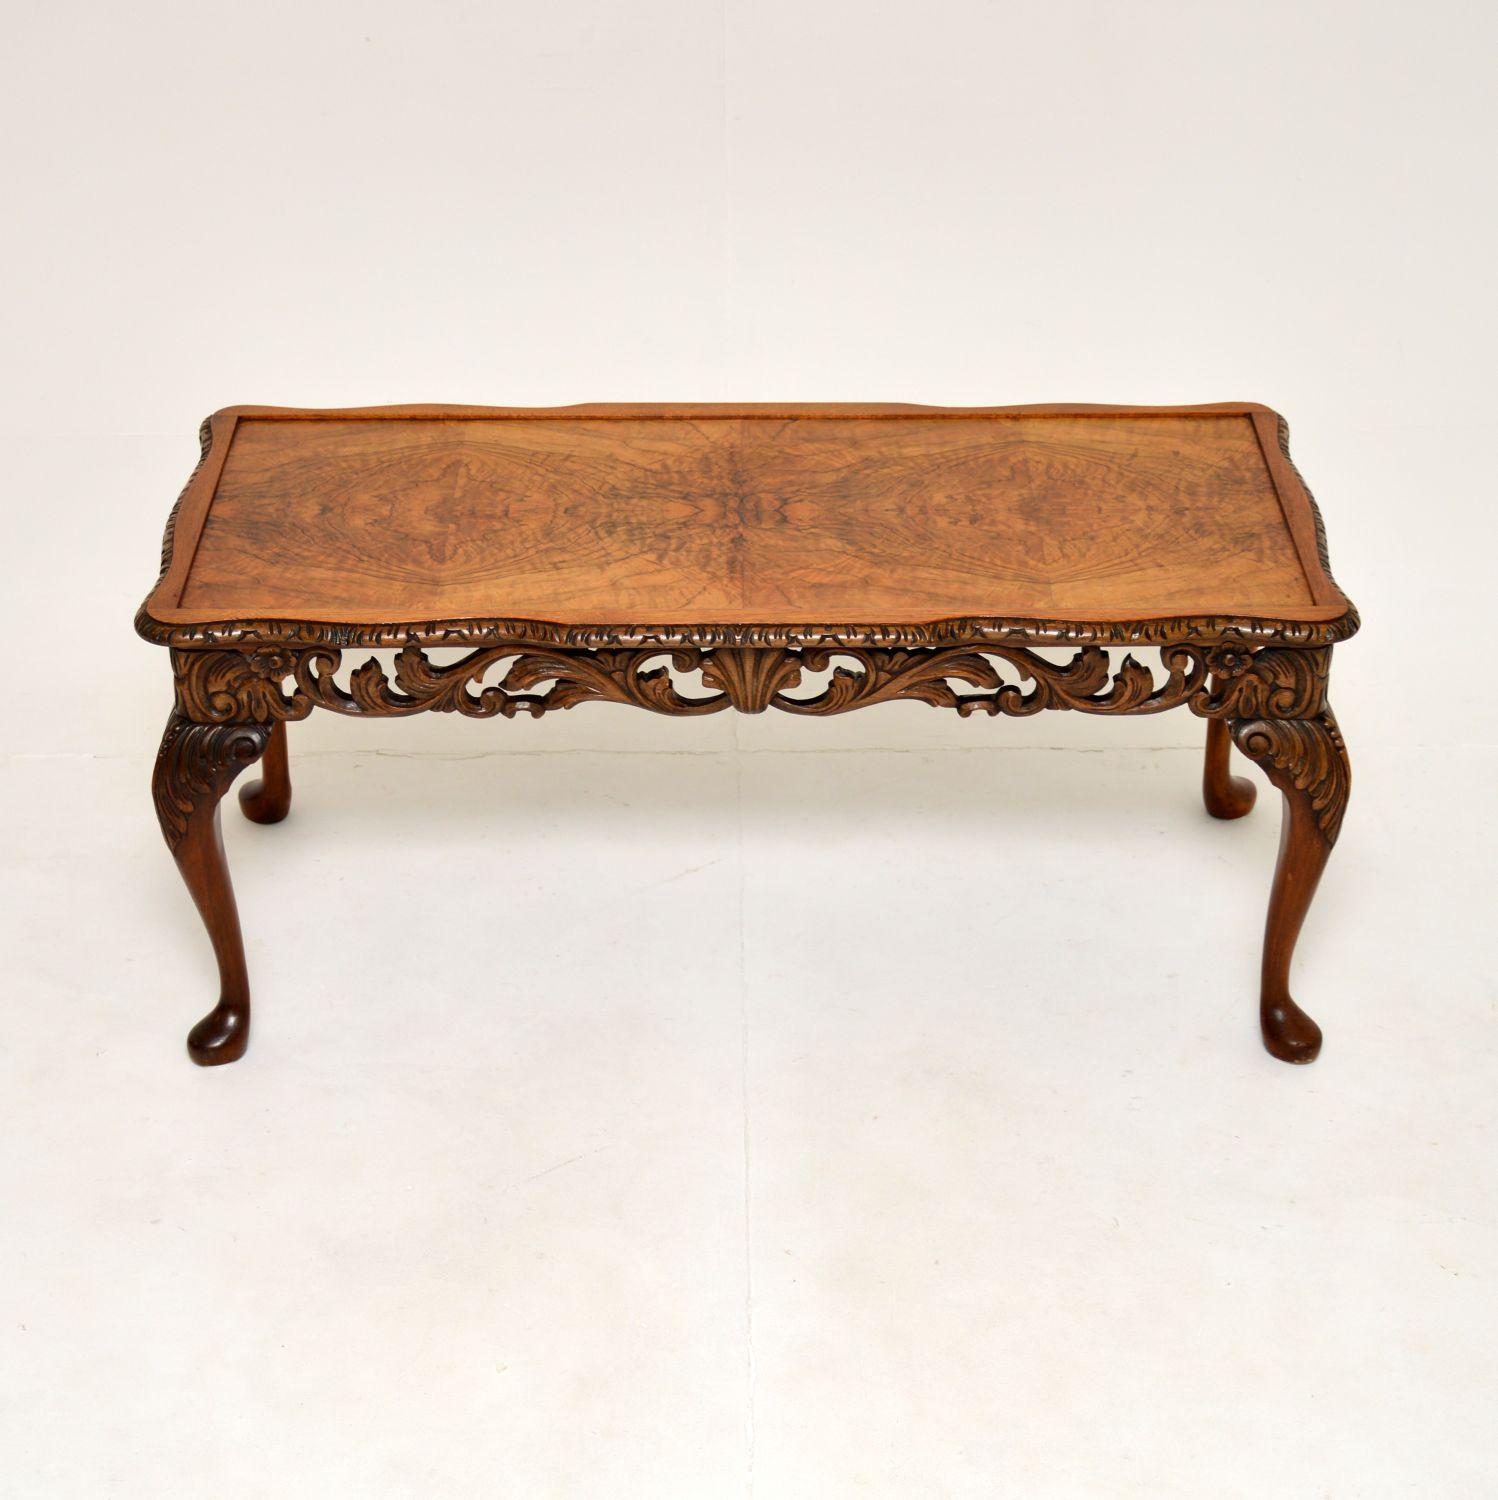 A beautiful and very well made antique figured walnut coffee table. This was made in England, it dates from around the 1920’s.

It is in the Queen Anne style, with gorgeous carving around the edges. It sits on cabriole legs with acanthus leaf